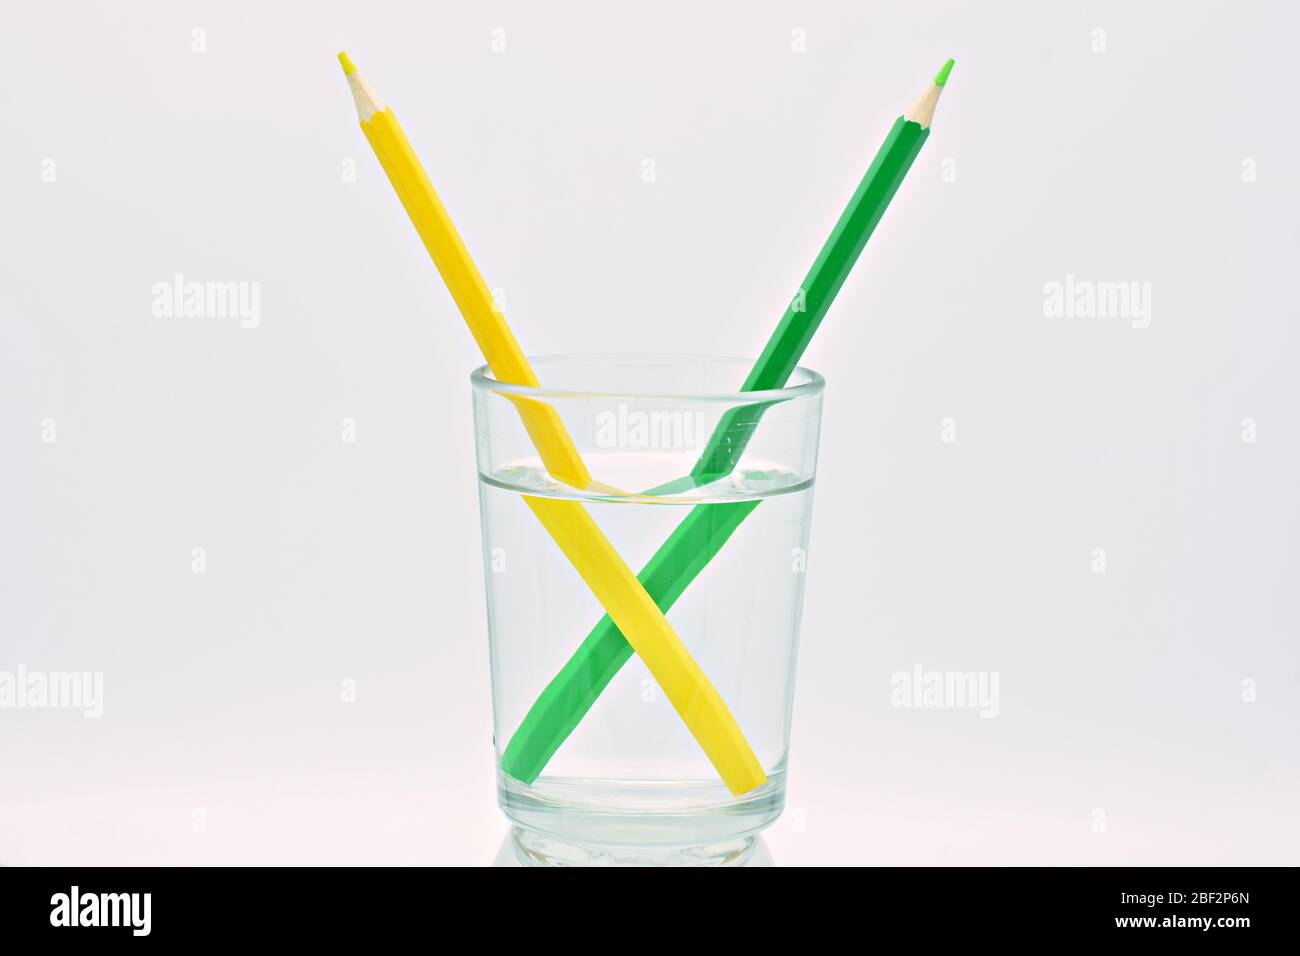 Yellow, blue and green pencils, inside a glass filled with water, explanation refraction of light Stock Photo